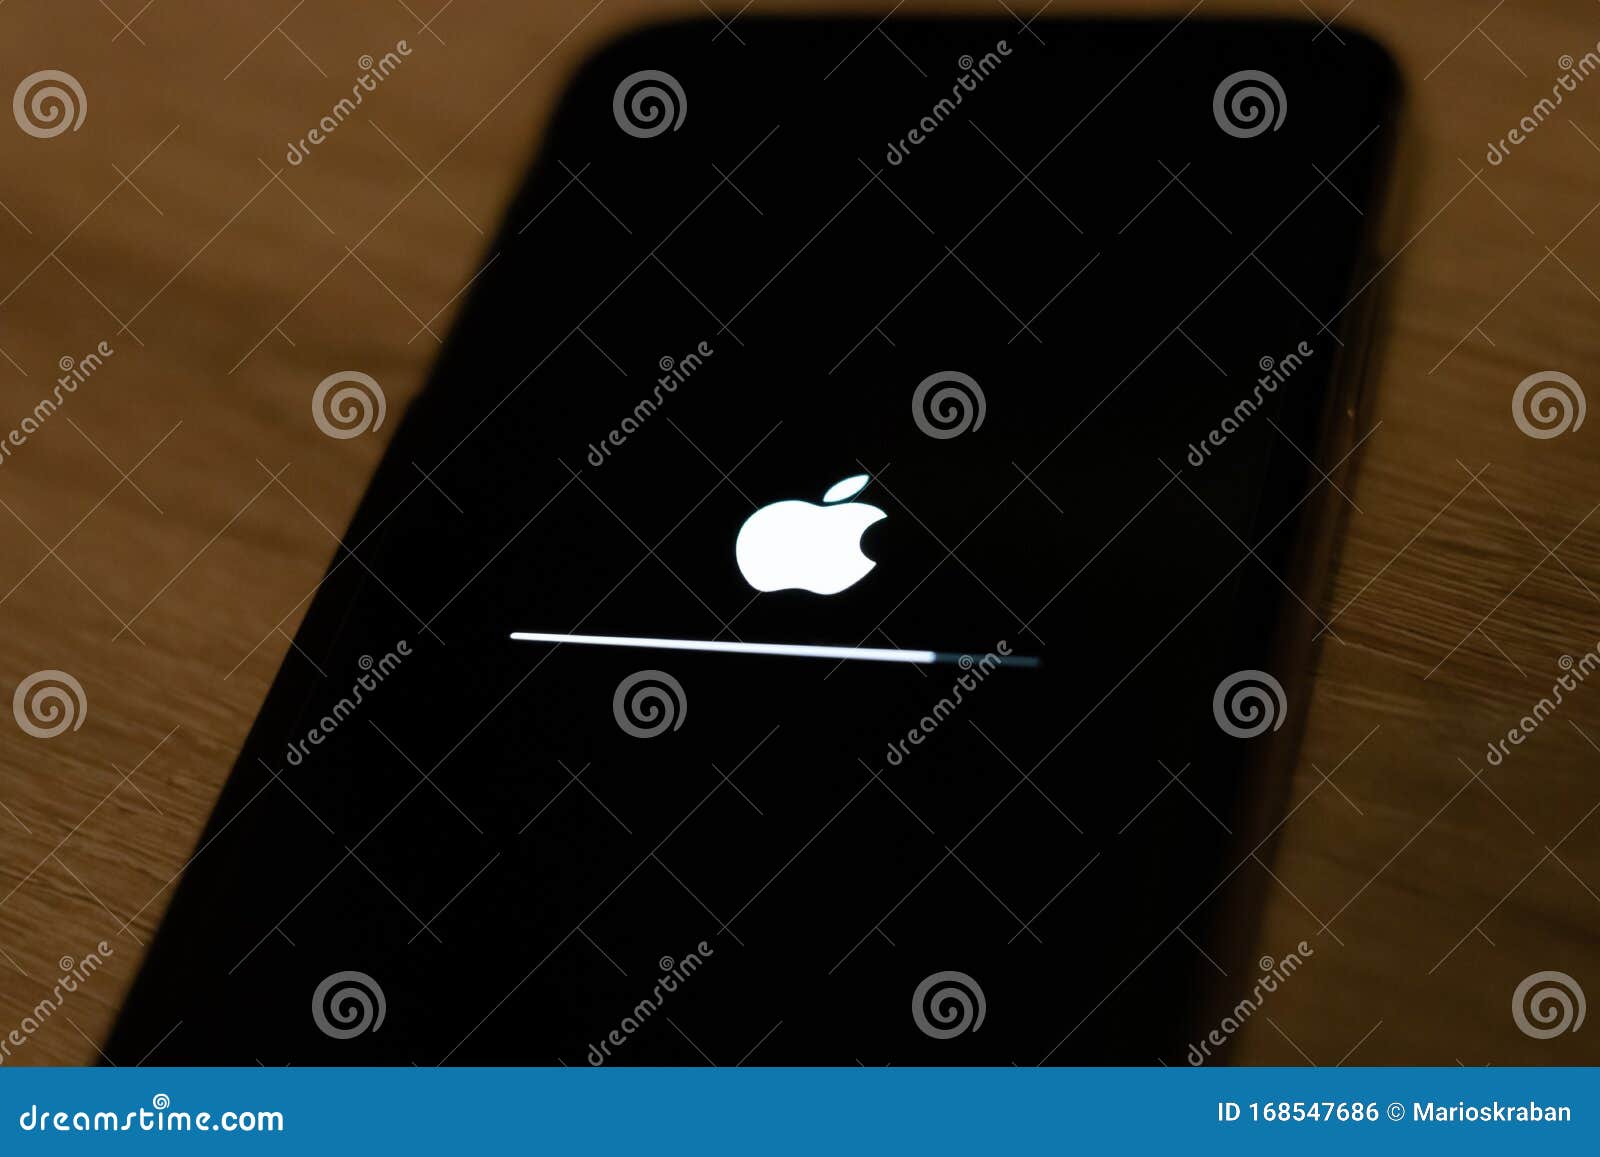 Iphone XS Updating, Apple Logo Update Editorial Photo - Image of mobile ...